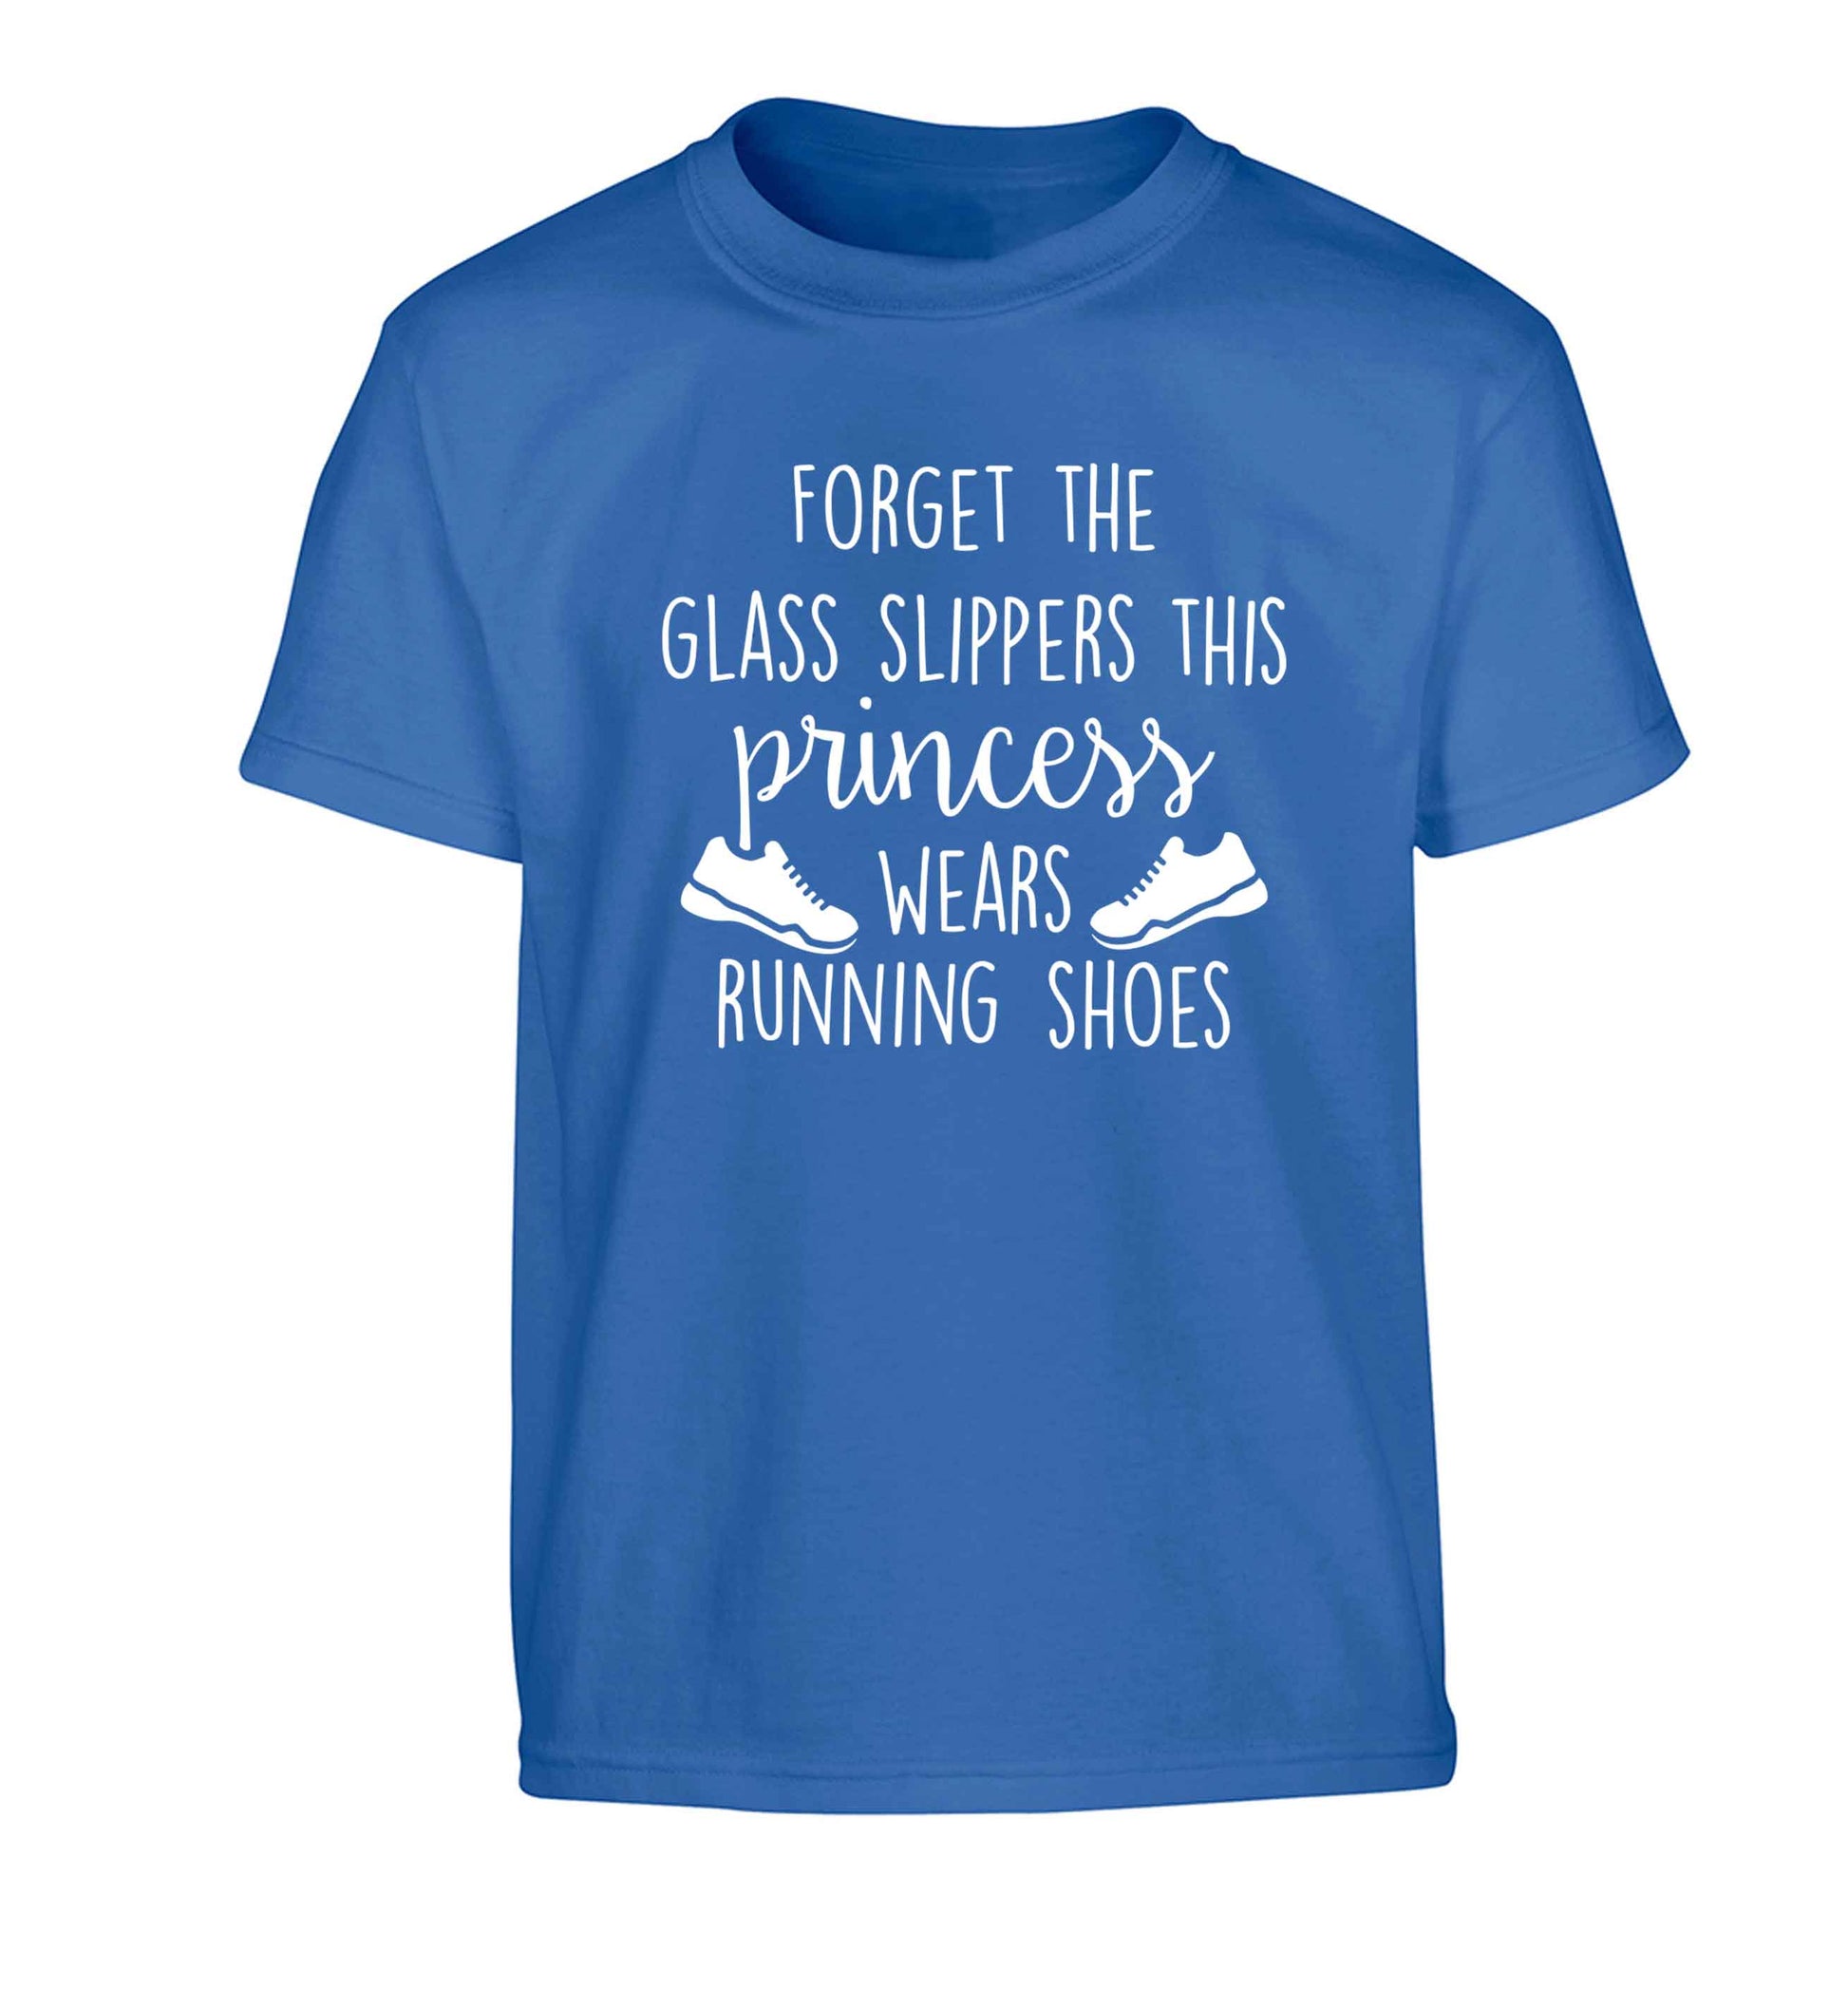 Forget the glass slippers this princess wears running shoes Children's blue Tshirt 12-13 Years